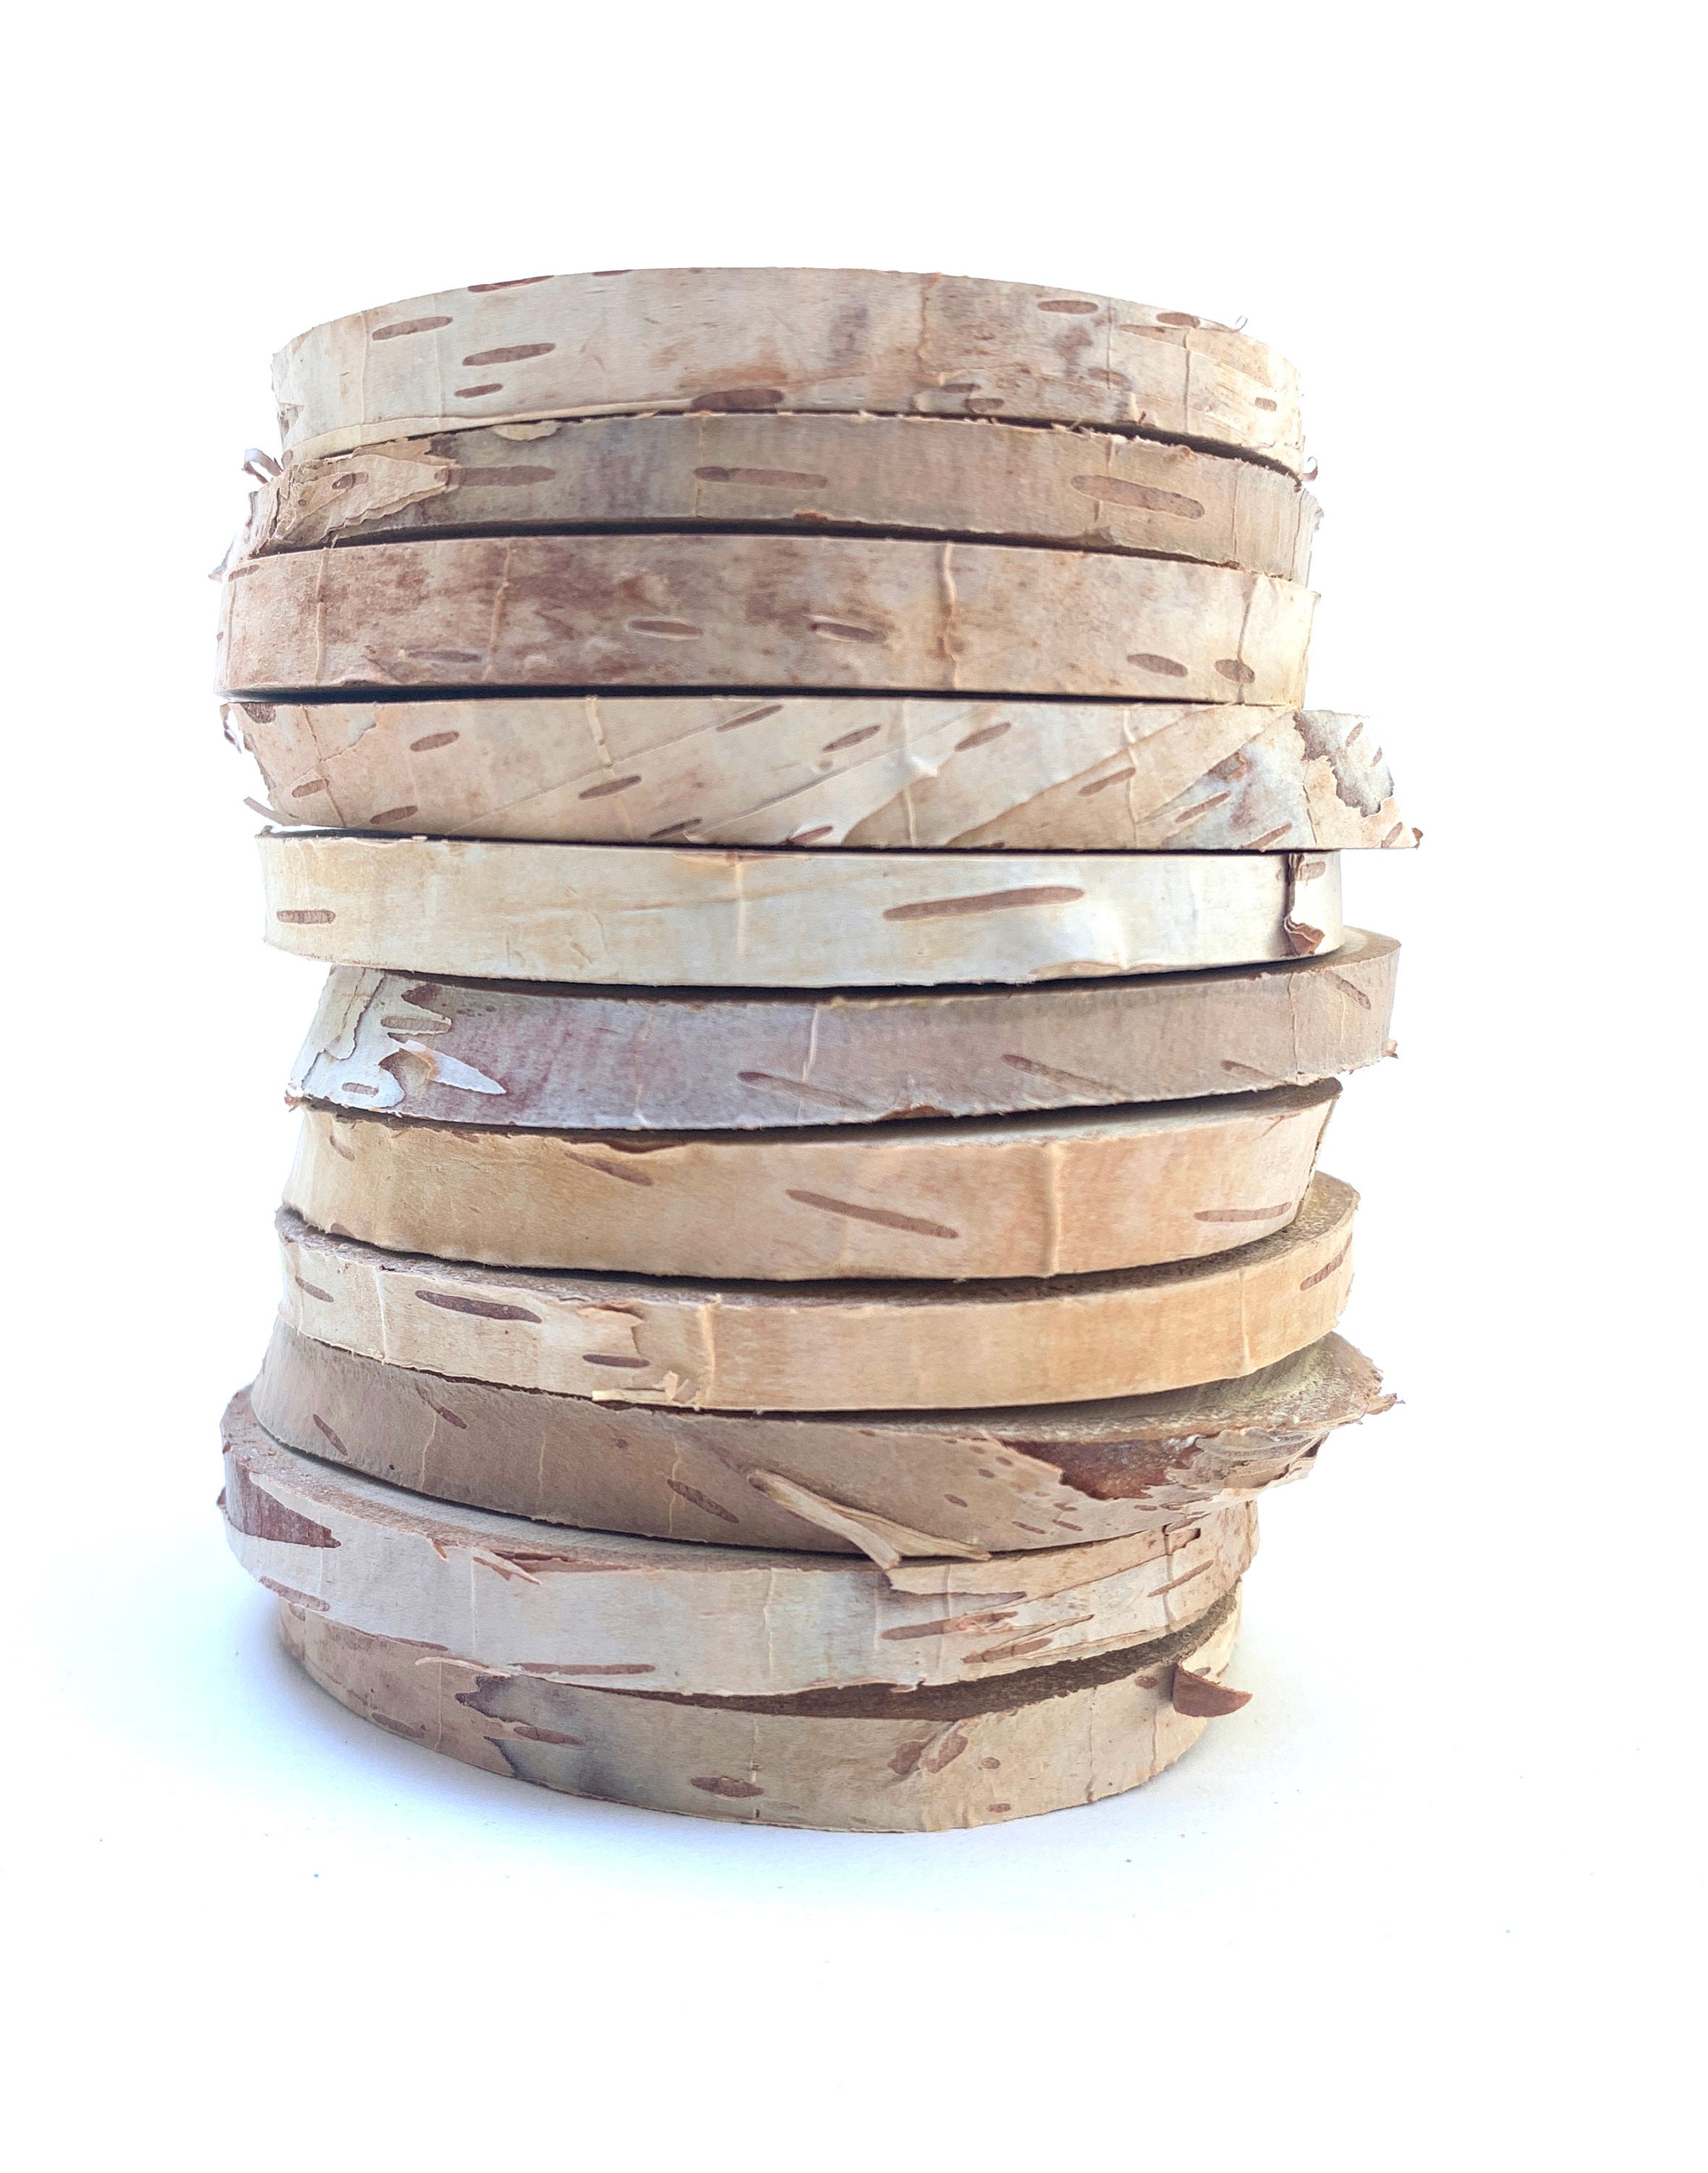 Round Wood Blanks Wood Sheets Slices Unfinished Wood Coaster Wood Pieces  for Crafts Coaster Blanks for Carving 